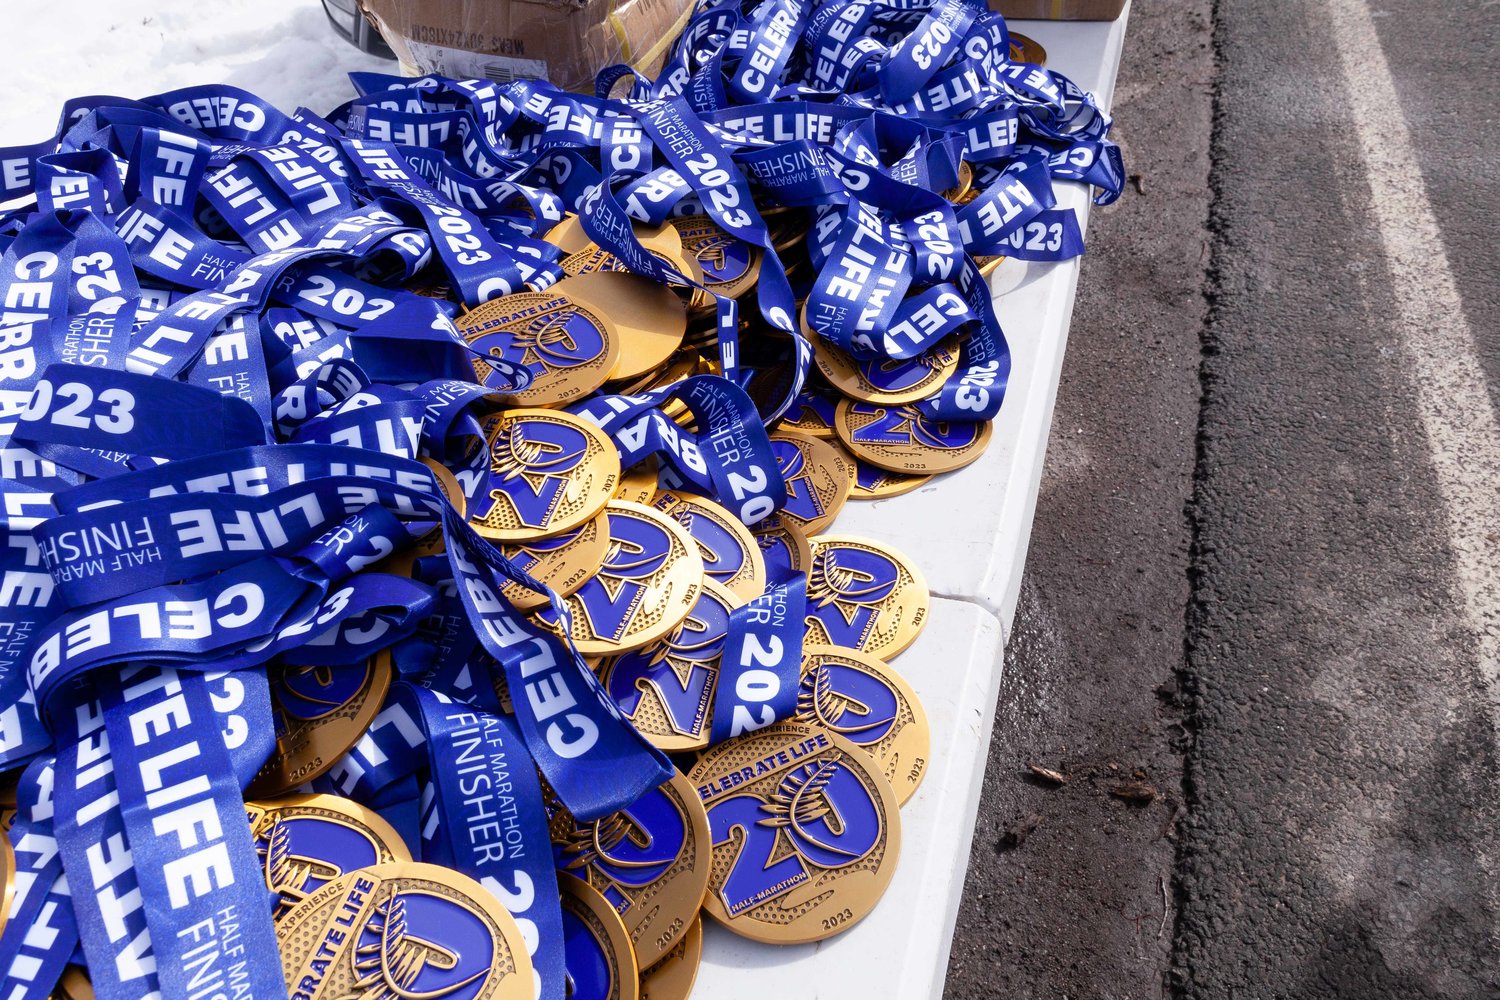 To commemorate the 20th anniversary of the Celebrate Life Half Marathon and Lucia Rein Two-Person Relay in Rock Hill, special medals were created to honor the achievements of the participants.